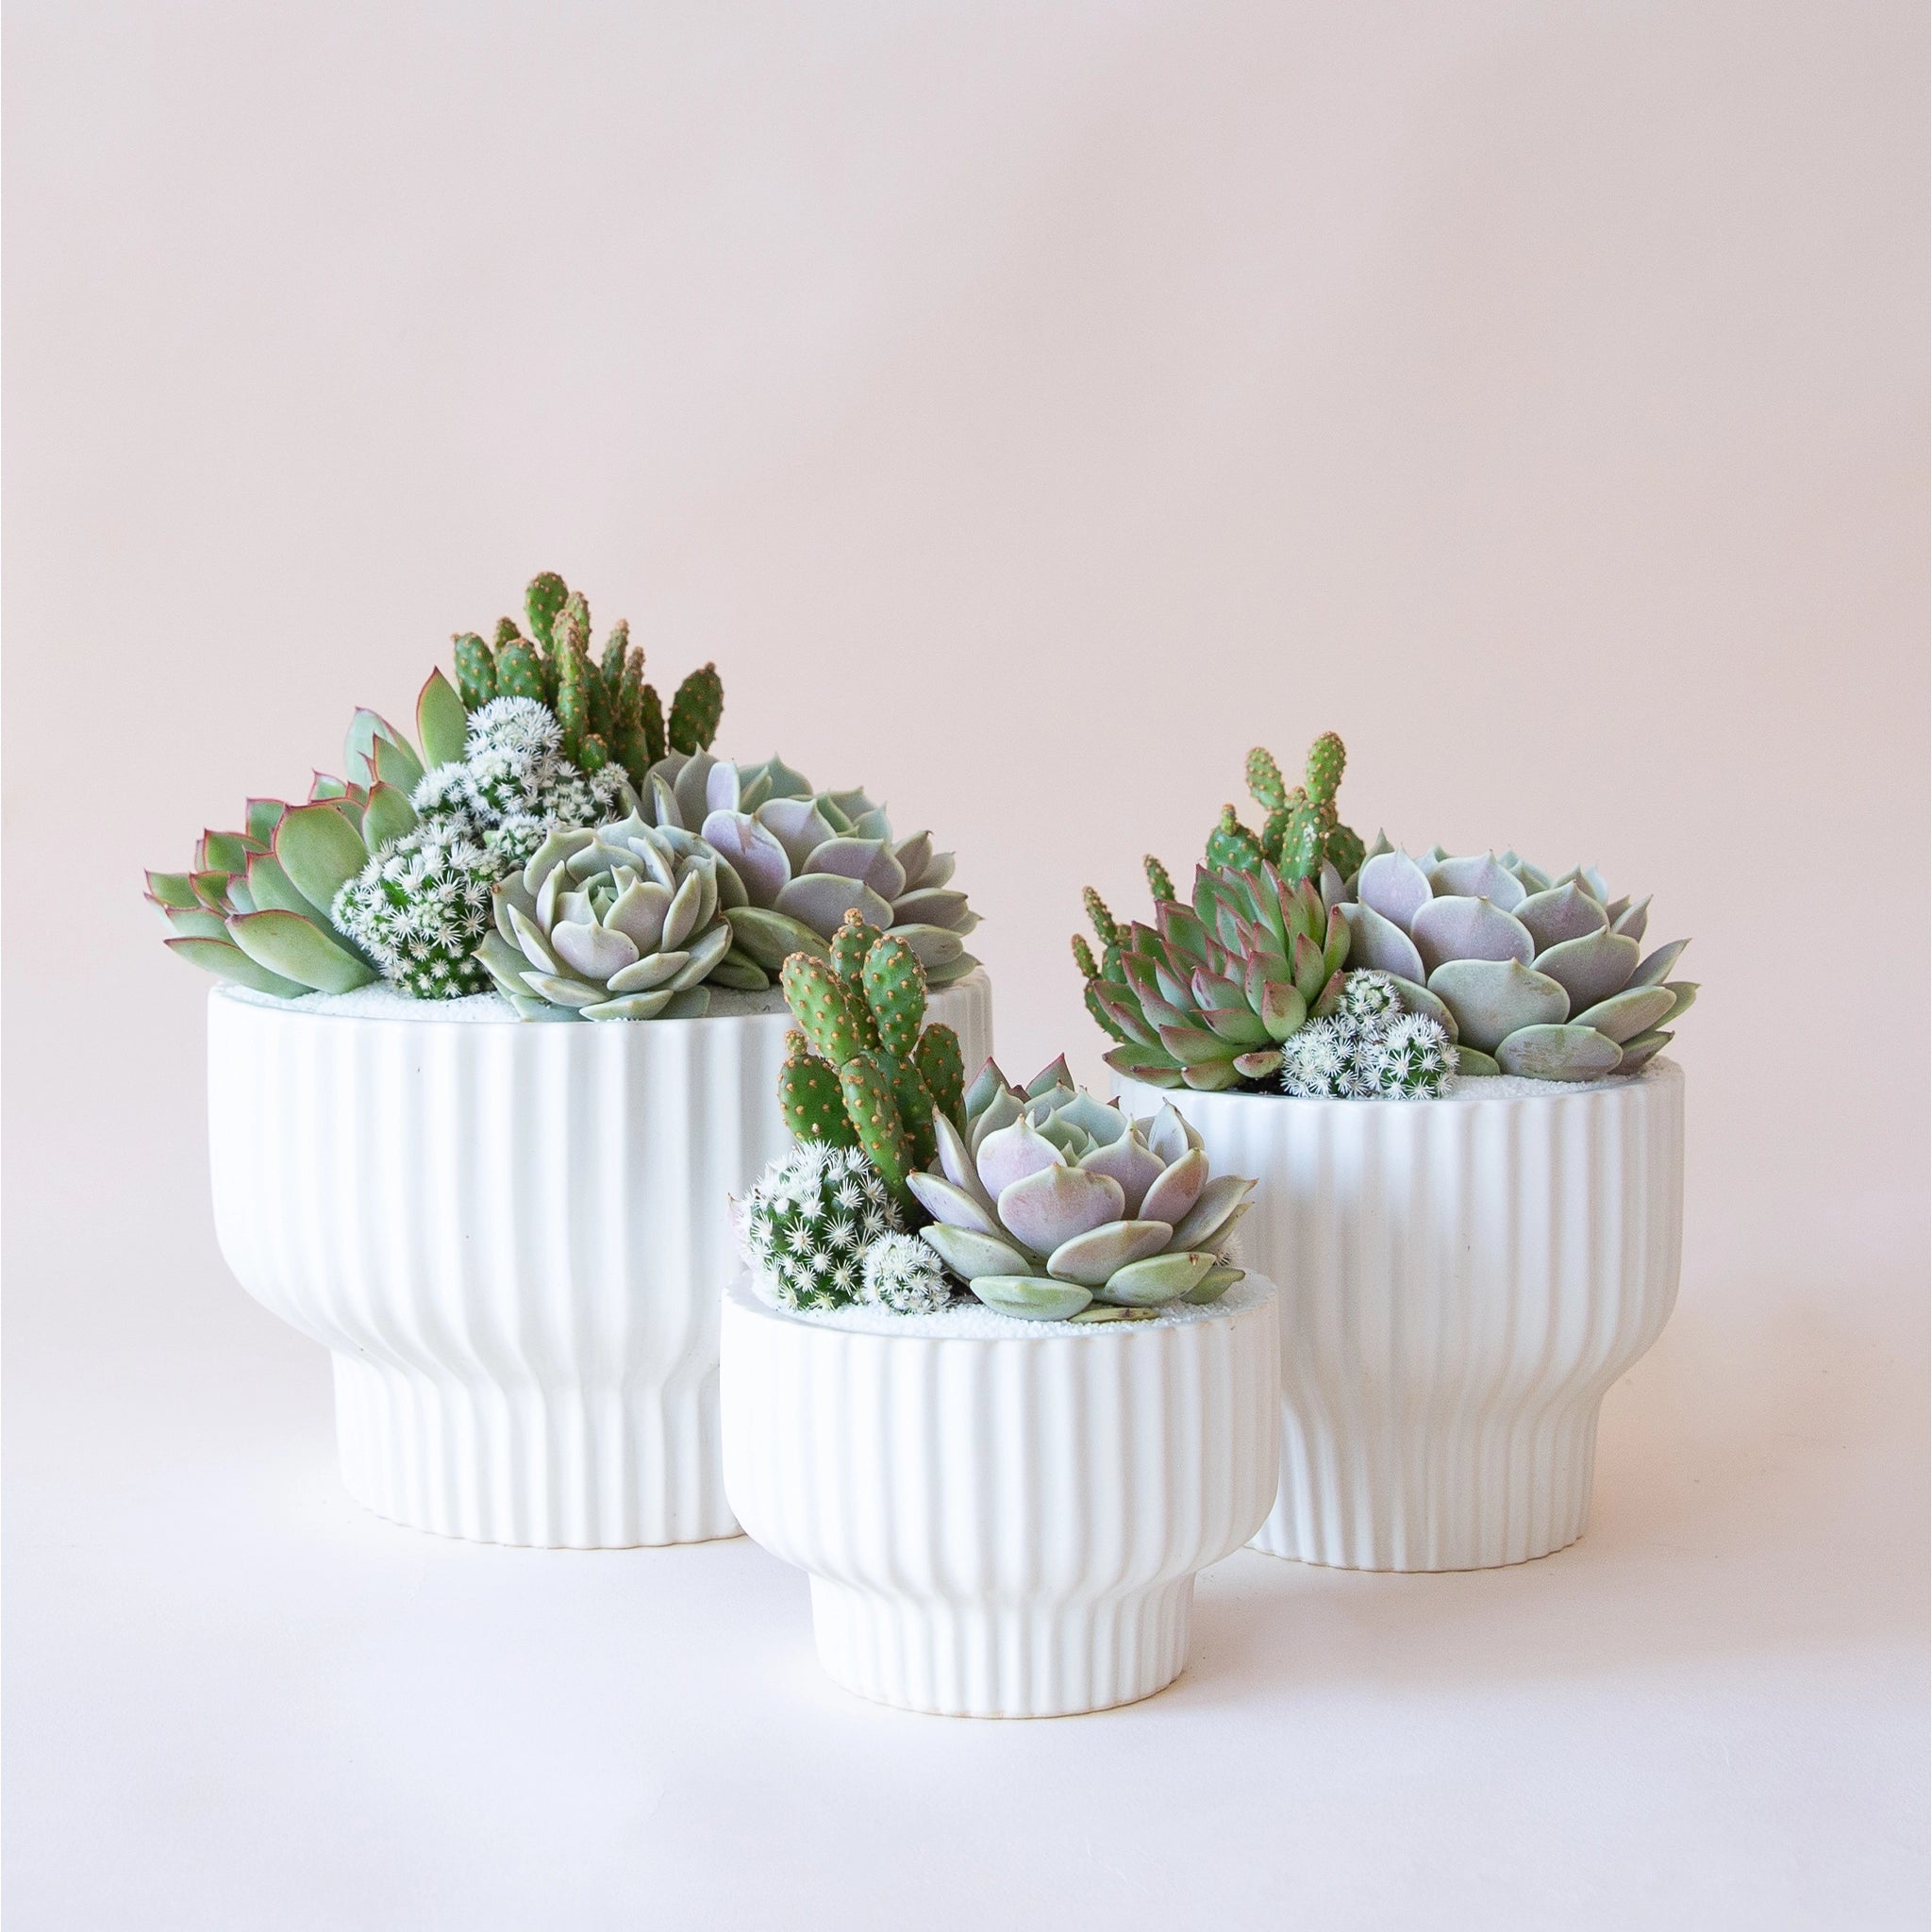 On a neutral background is a white ribbed pedestal planter in three different sizes filled with cactus and succulent arrangements. 